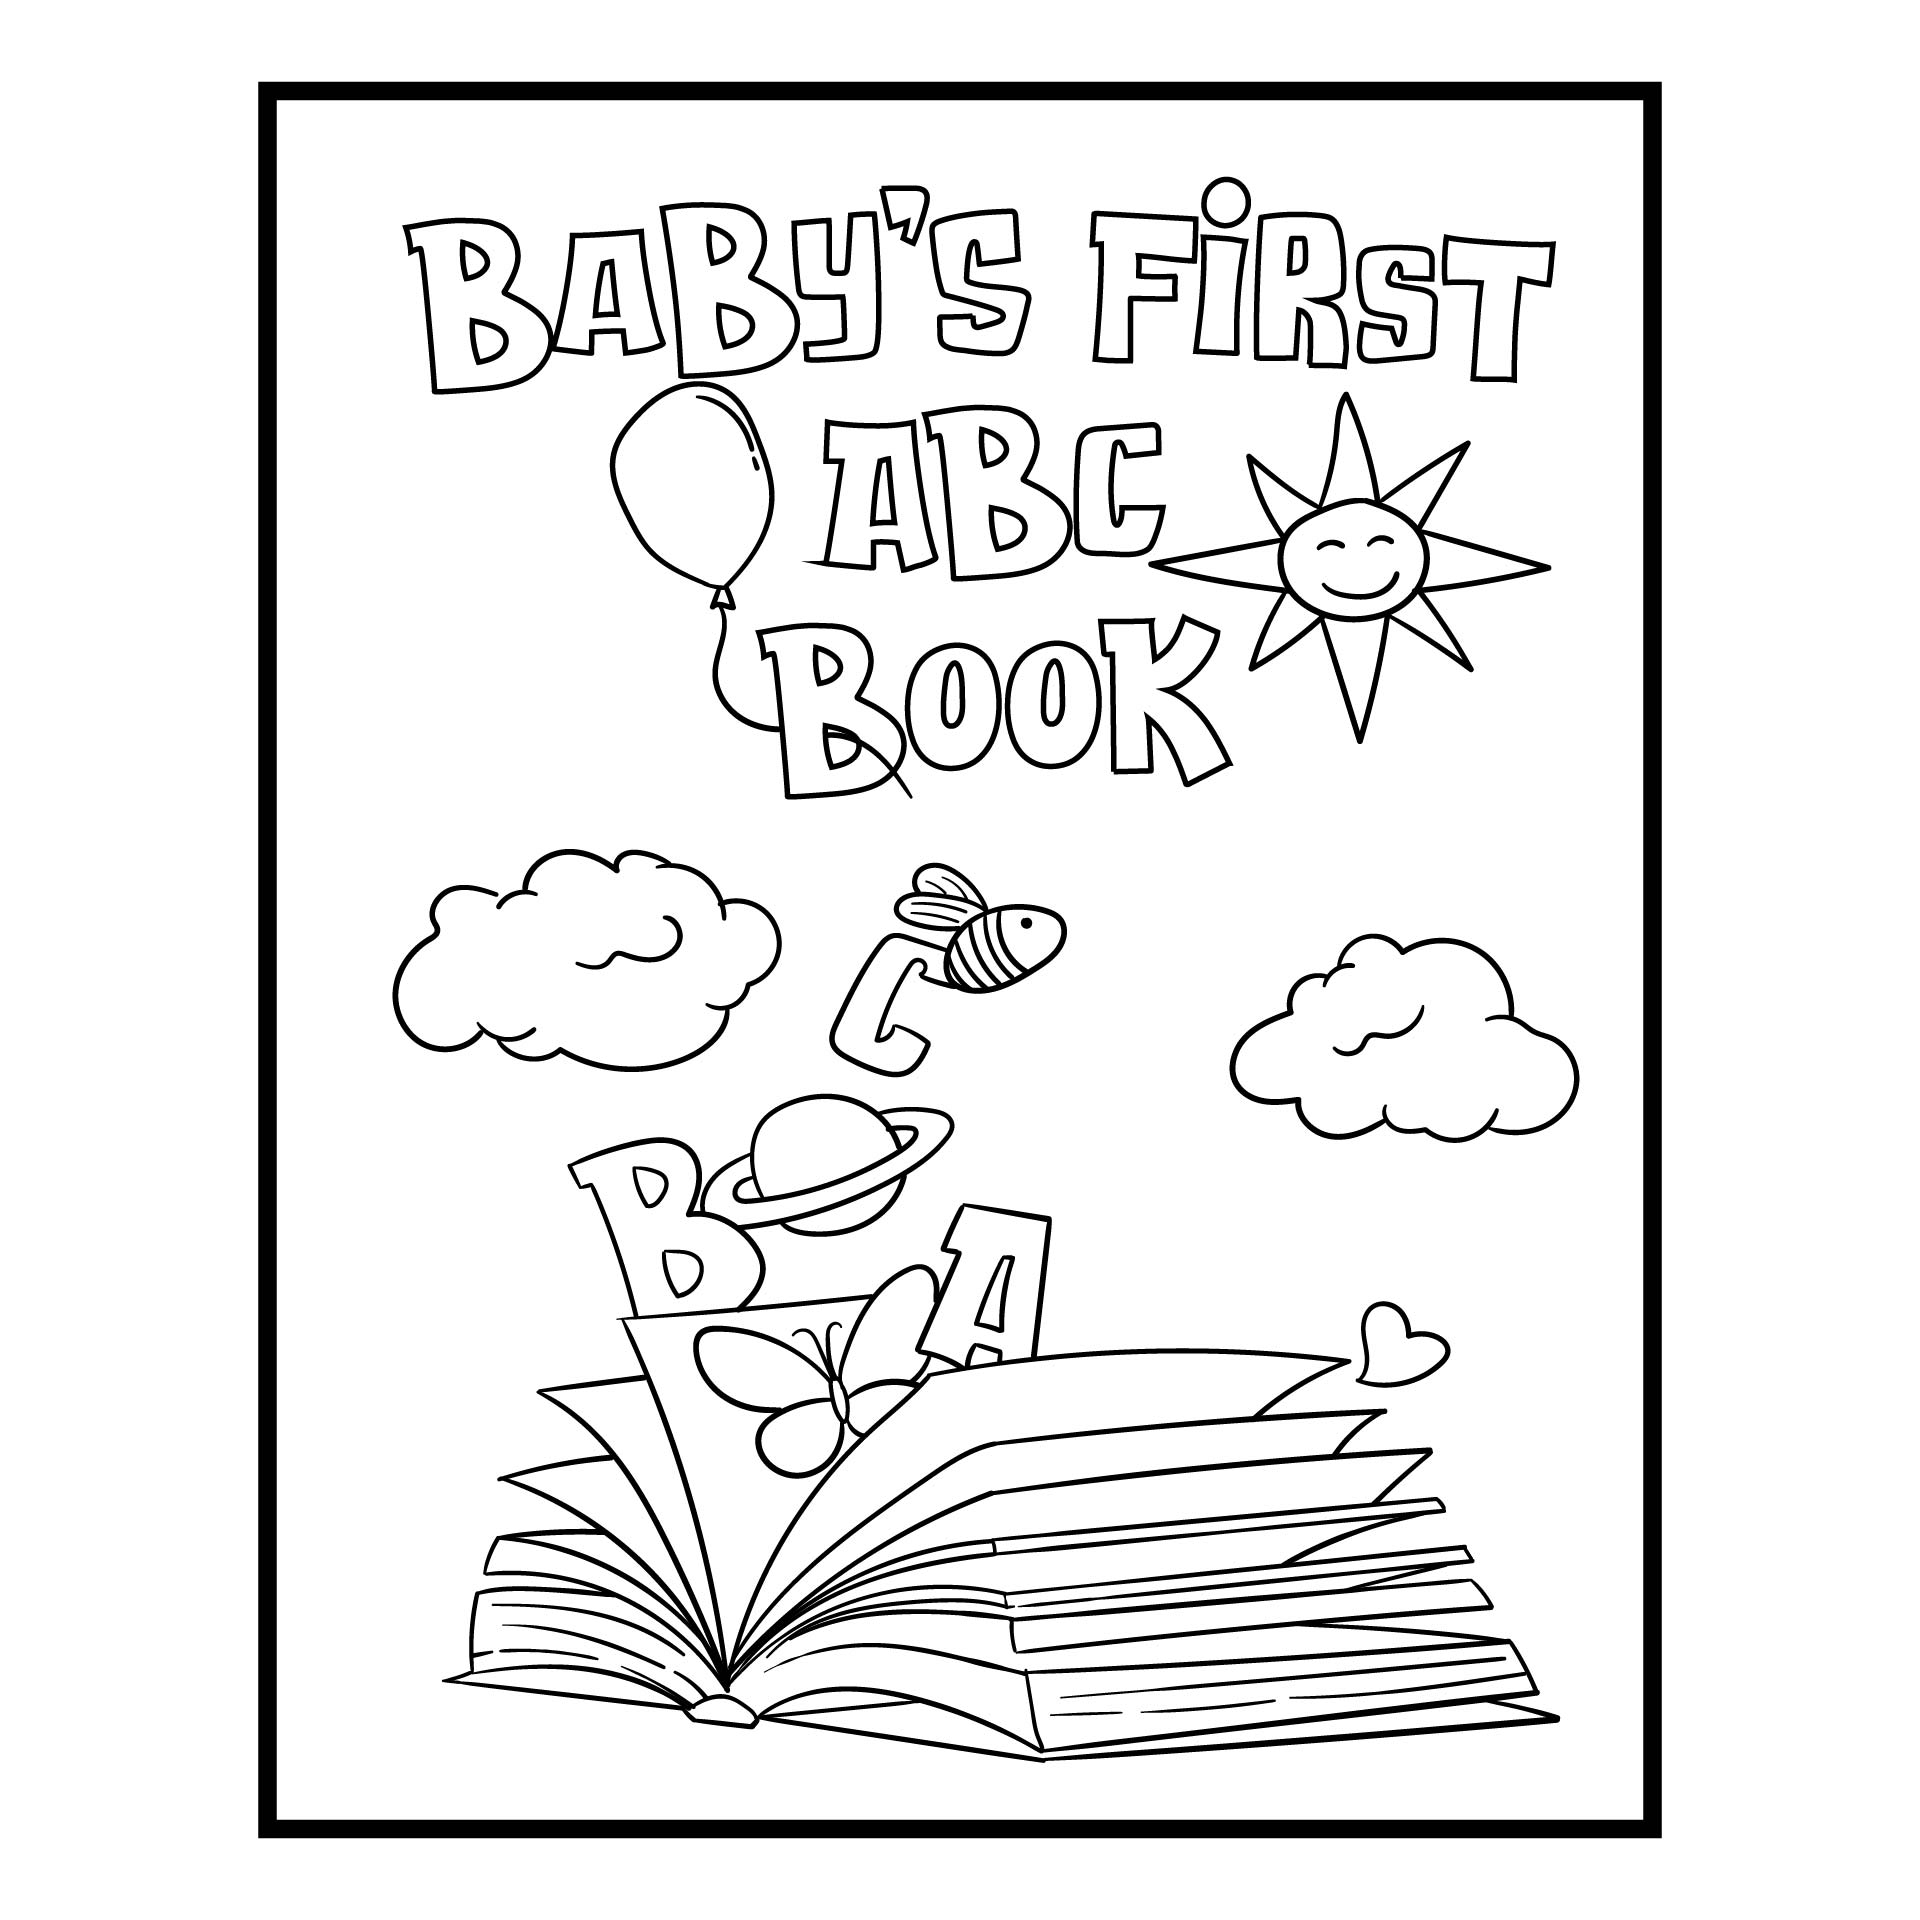 Printable Babys First ABC Book Coloring Pages Activity